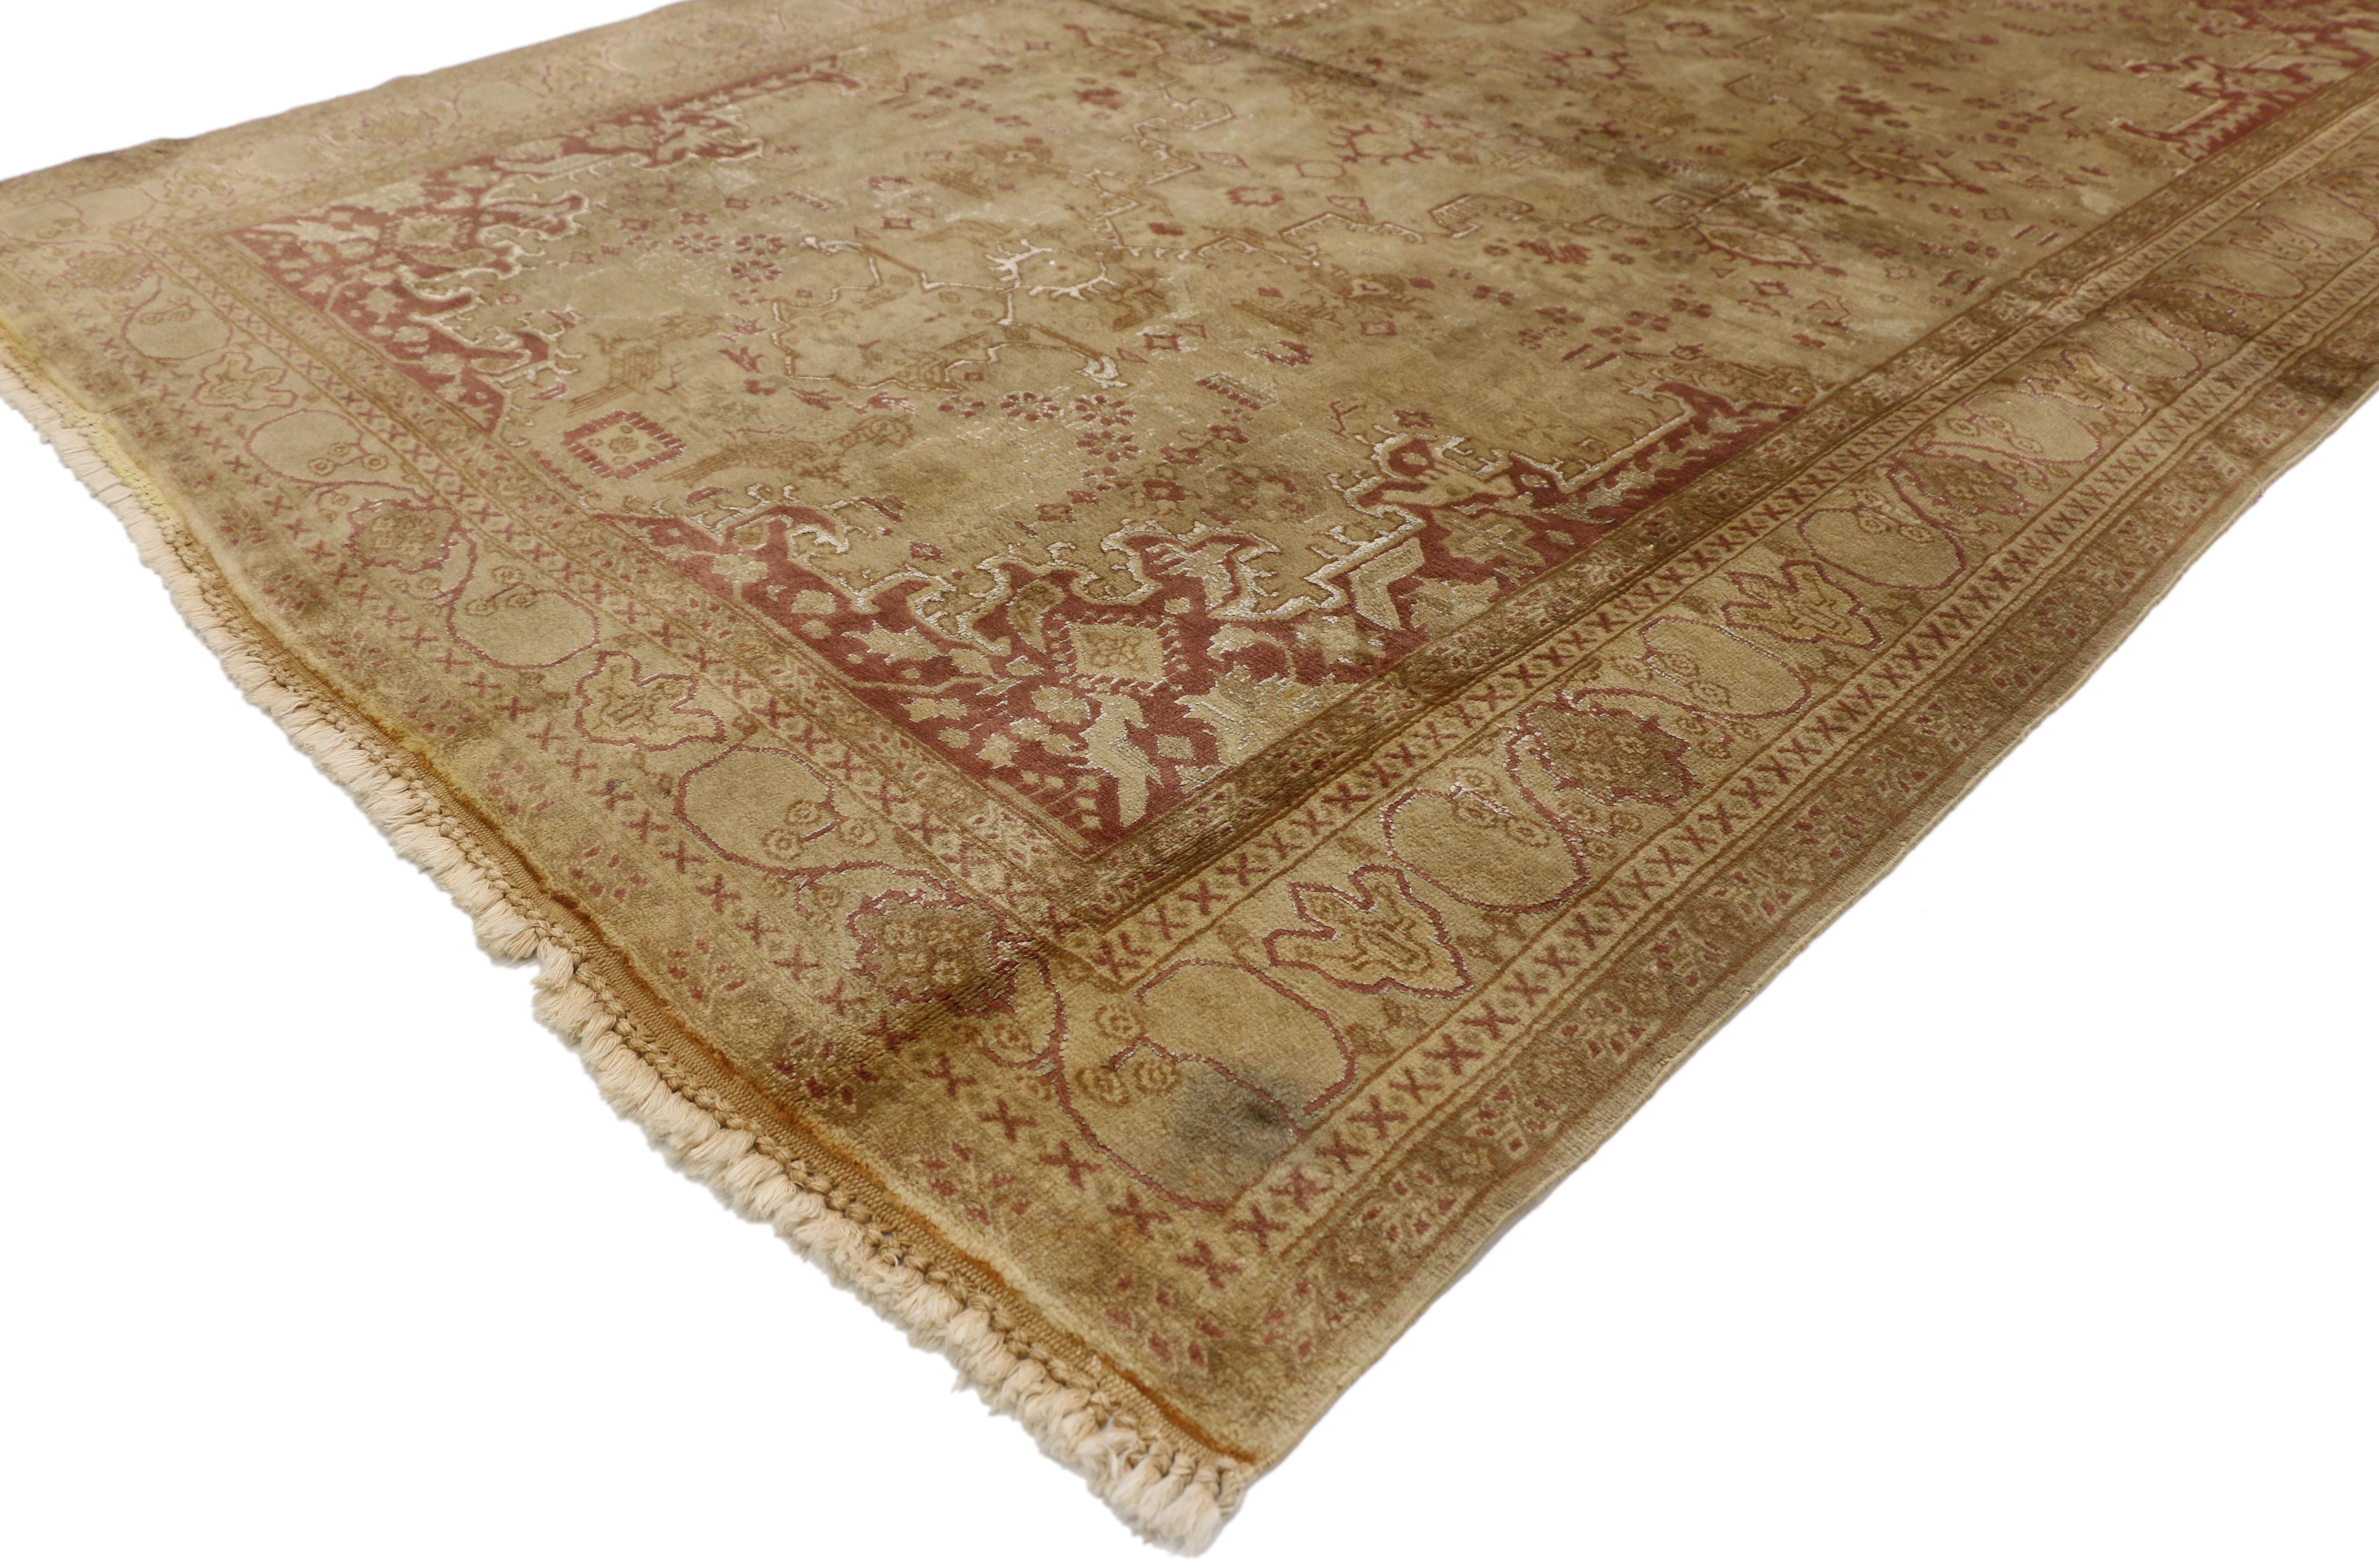 71930 Vintage Persian Ardabil Rug with Rustic Artisan Shabby Chic Style. This hand-knotted wool vintage Persian Ardabil rug features an inconspicuous centre medallion floating in an an abrashed field surrounded by geometric motifs while rustic mauve